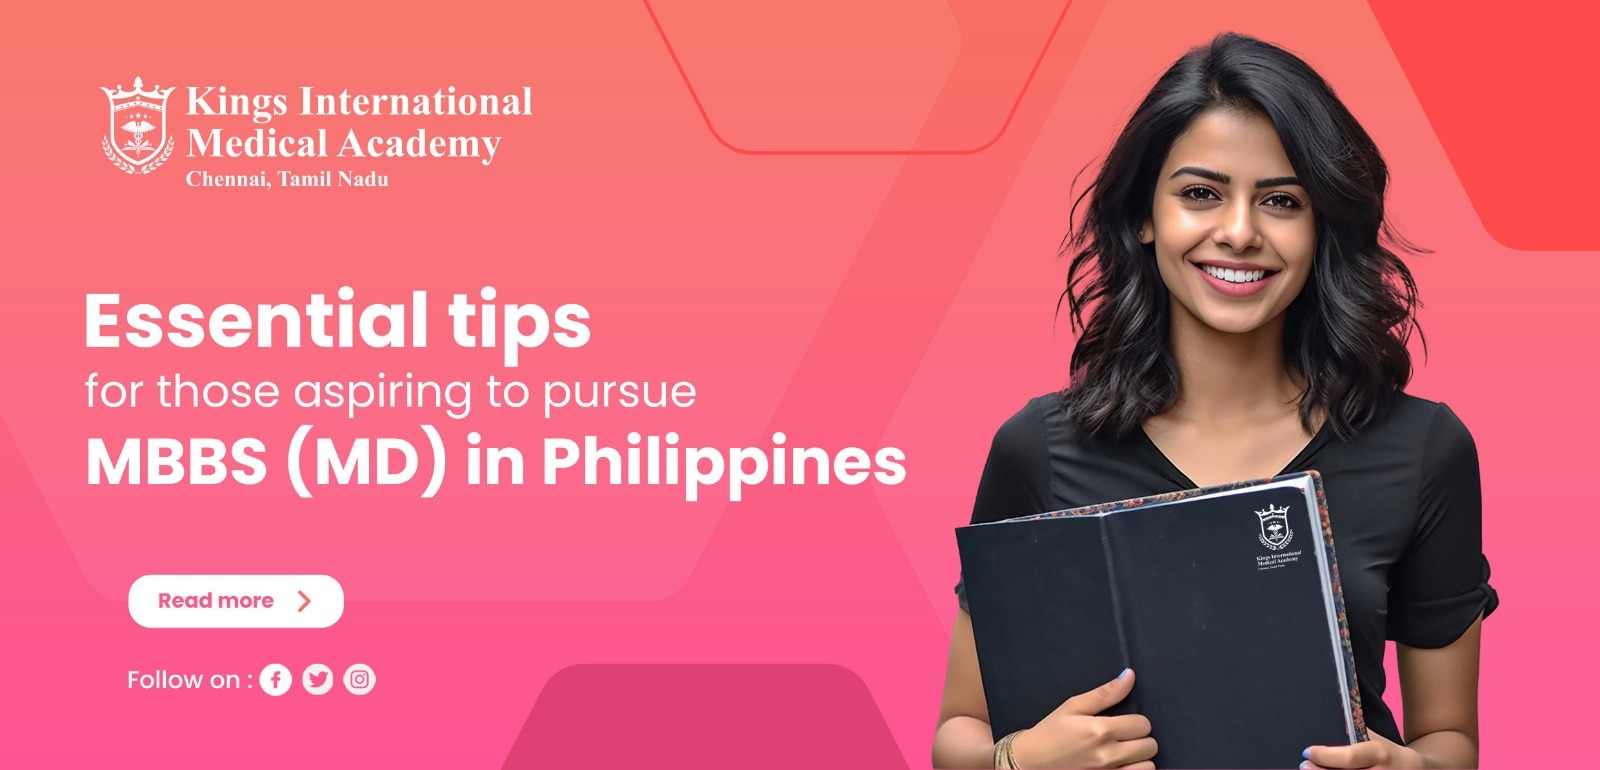 Essential tips for those aspiring to pursue MBBS in Philippines